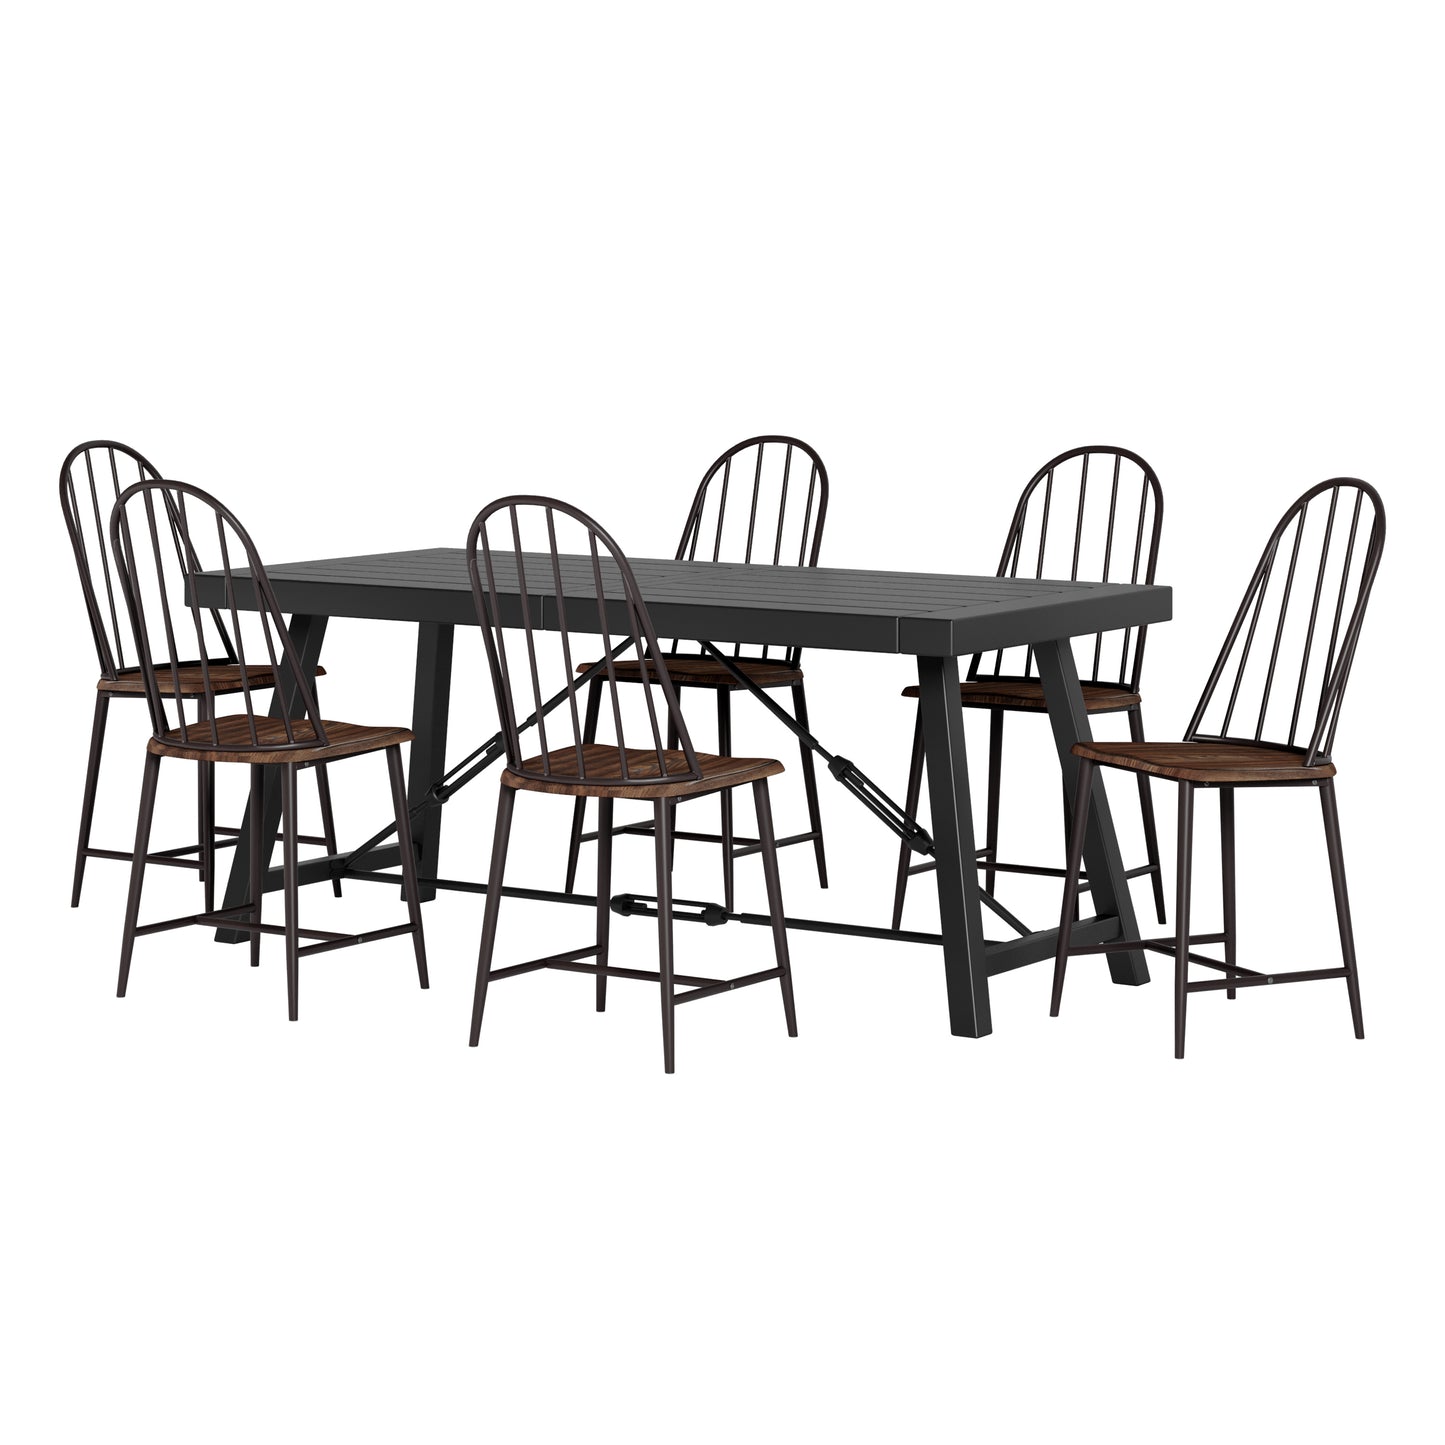 Southview Modern Industrial Iron and Wood 7 Piece Dining Table, Black and Dark Brown